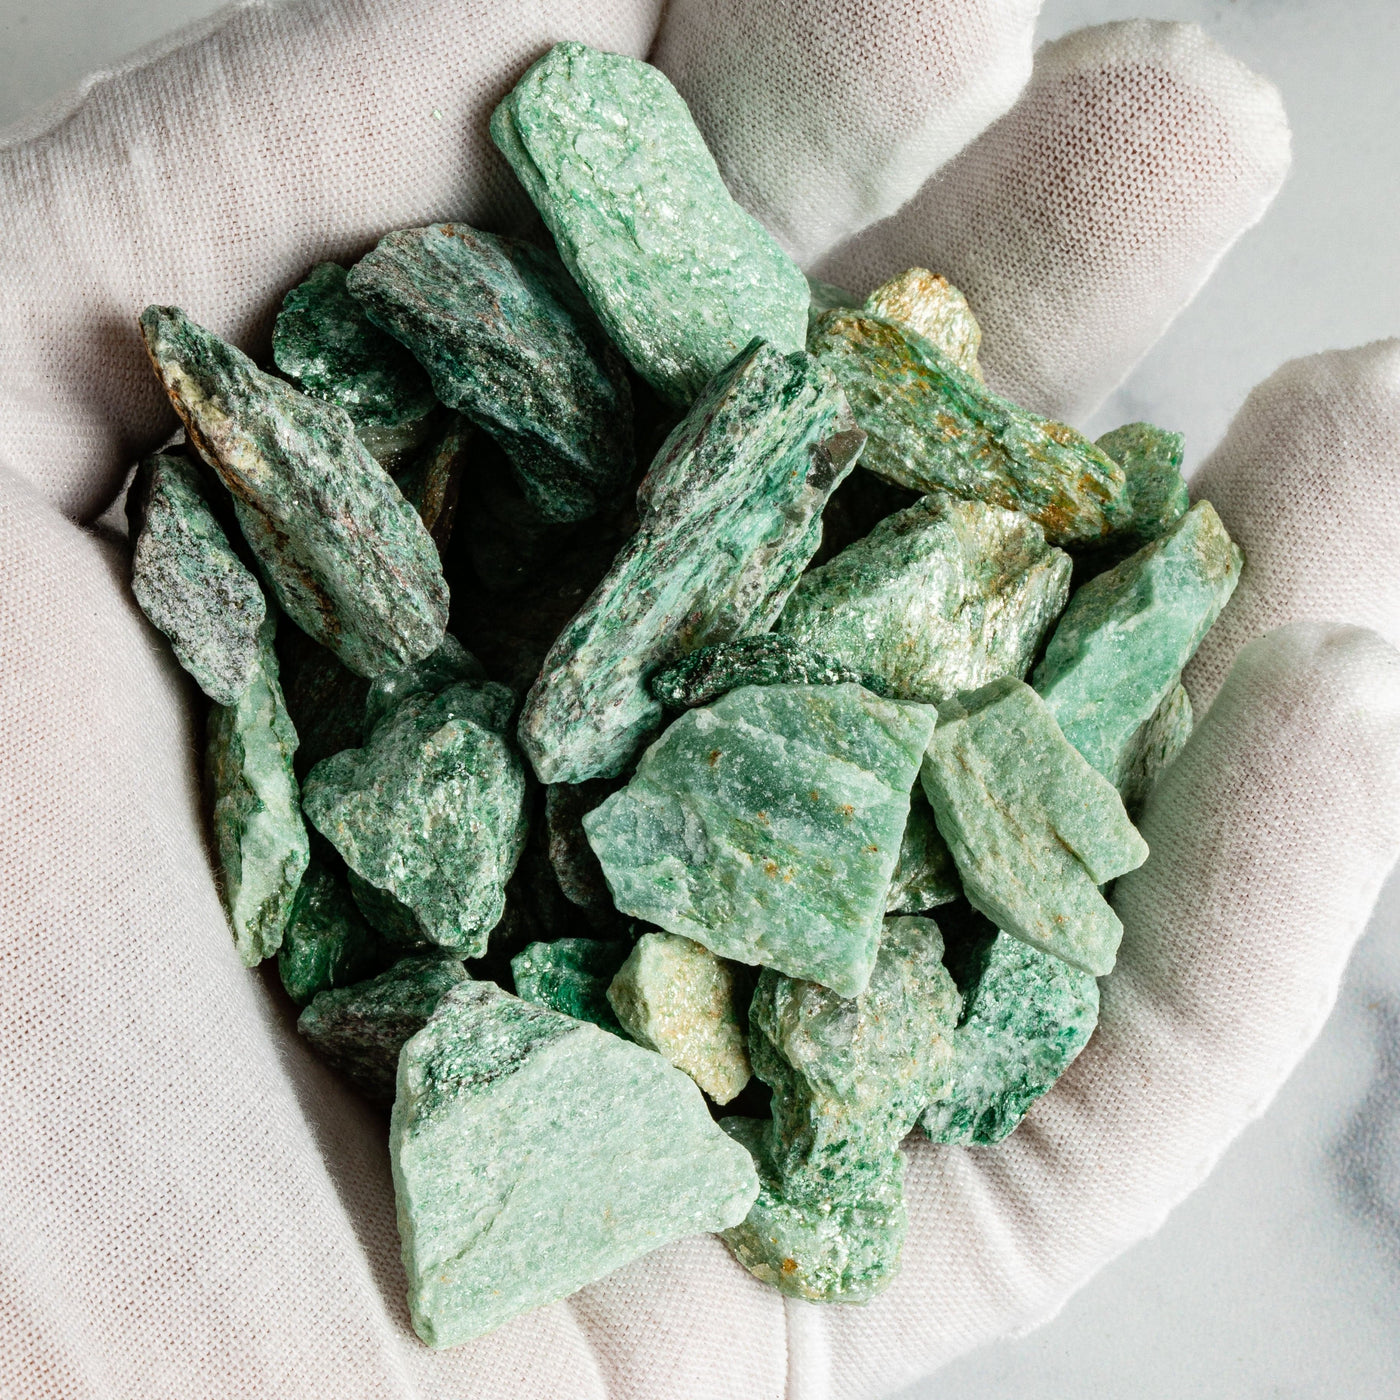 Fuchsite Stones in a hand up close